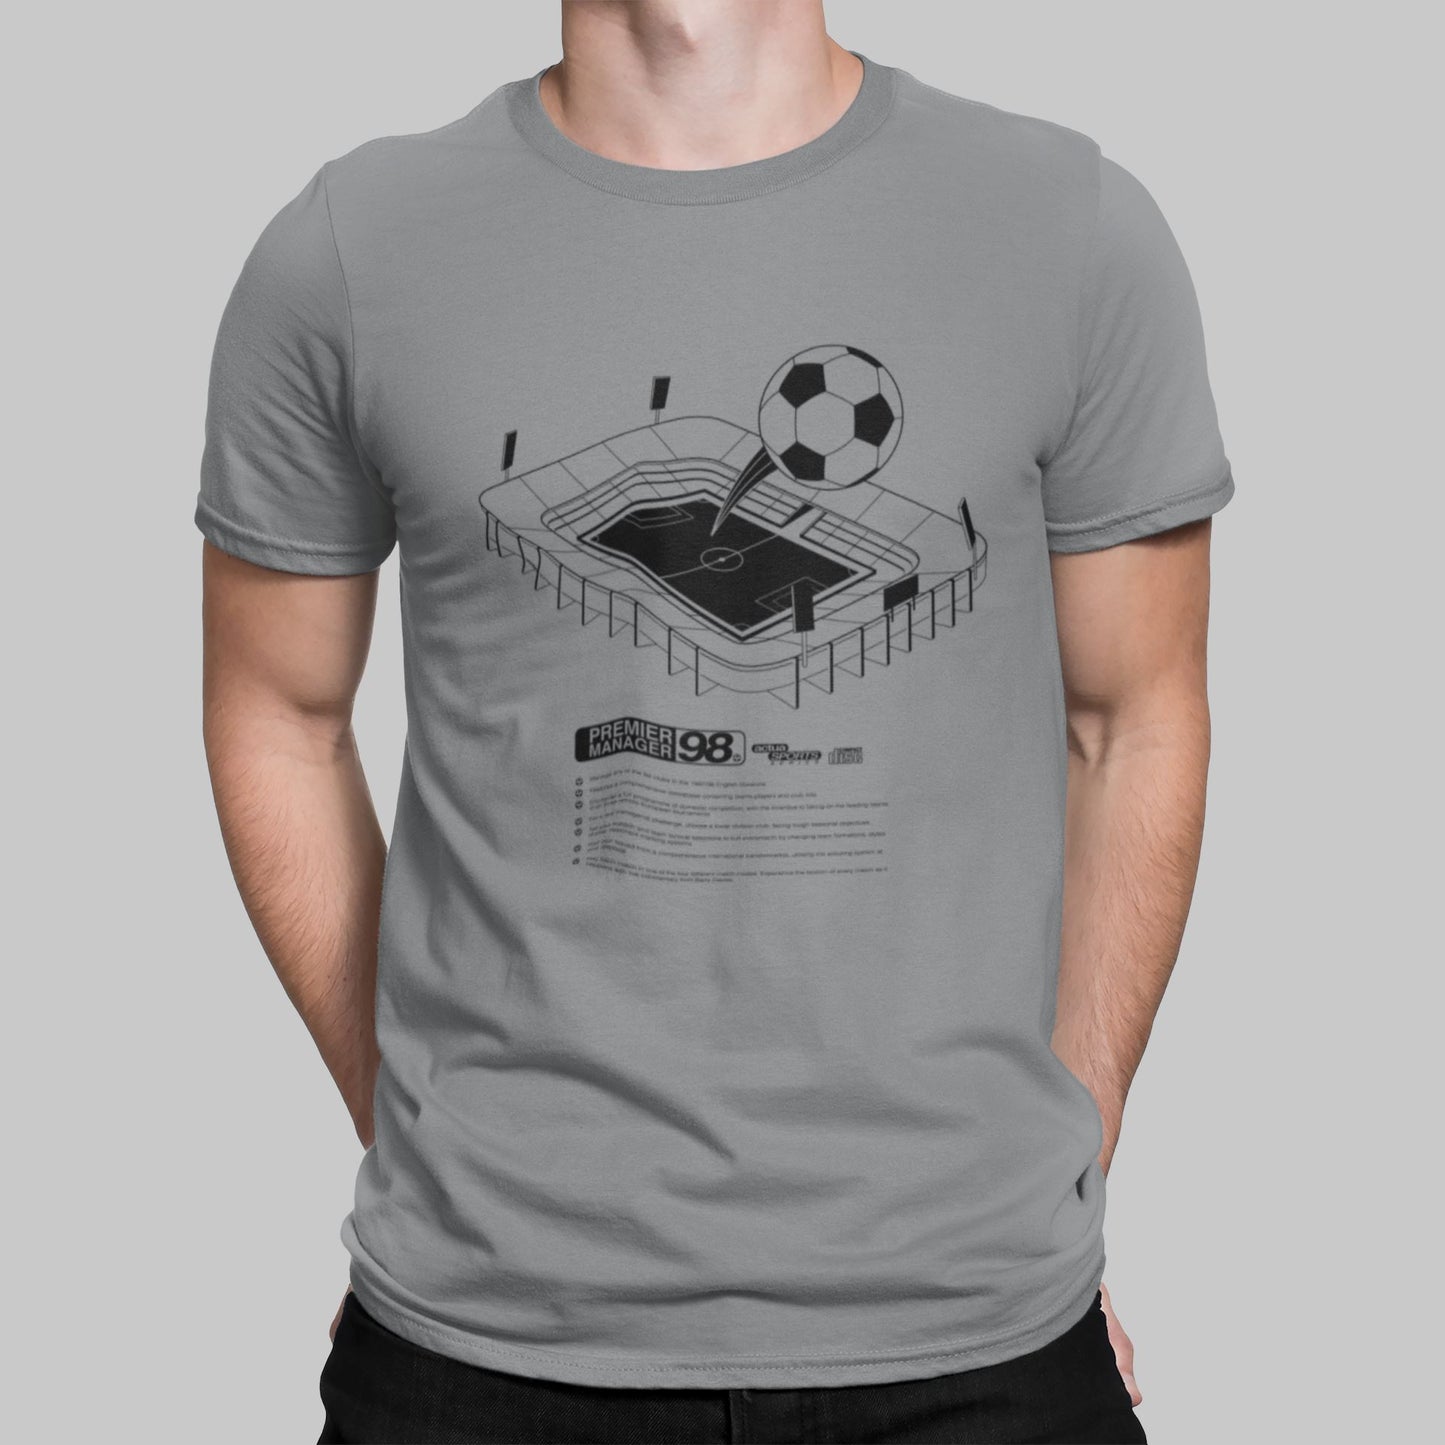 Premier Manager Retro Gaming T-Shirt T-Shirt Seven Squared Small 34-36" Sport Grey 